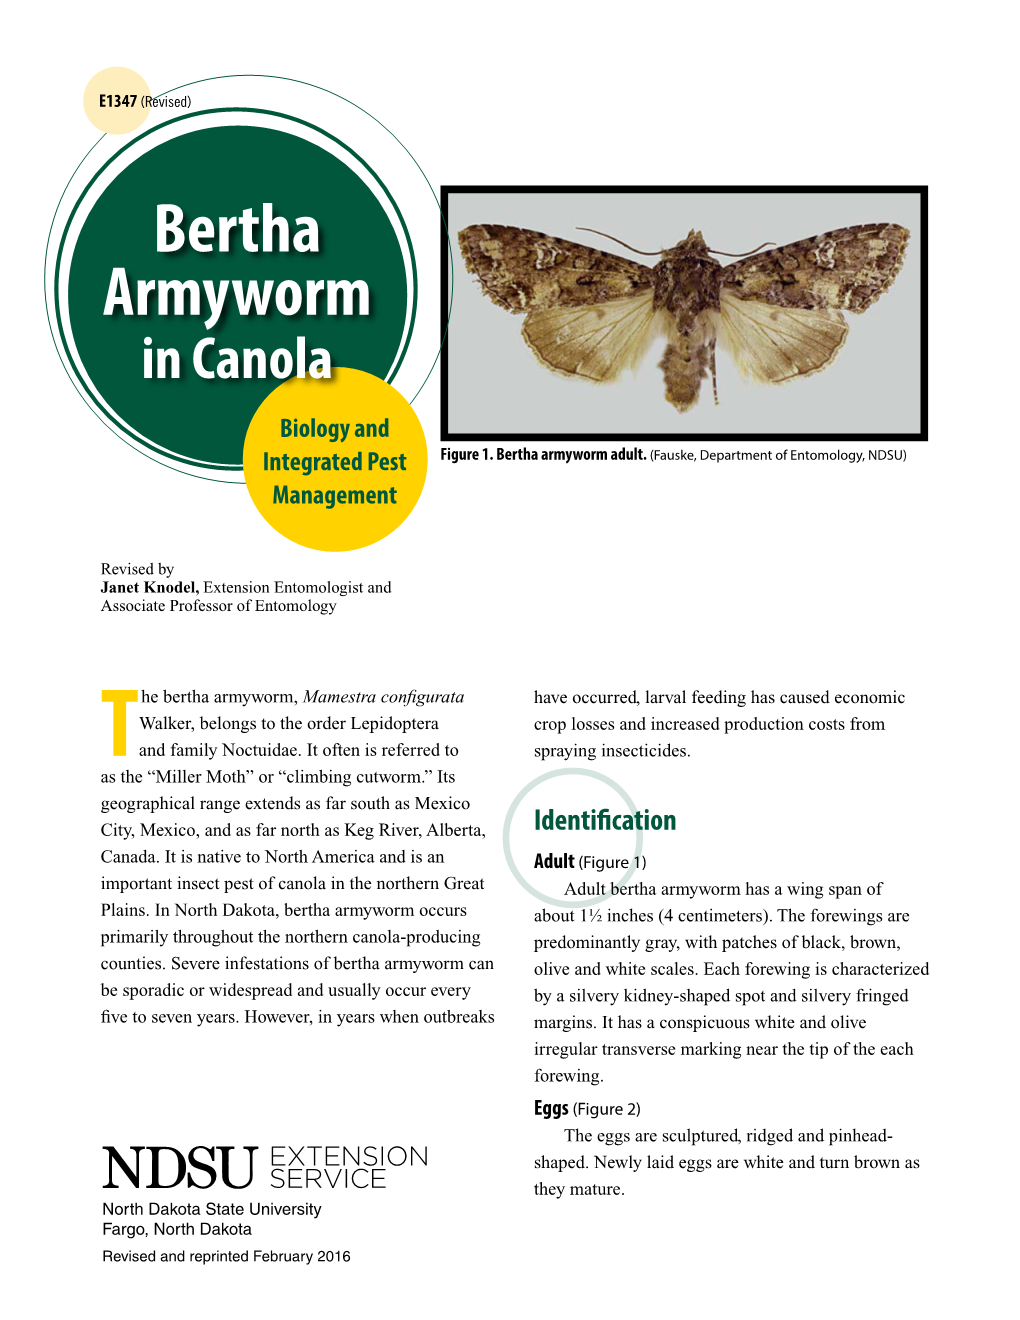 Bertha Armyworm in Canola: Biology and Integrated Pest Management